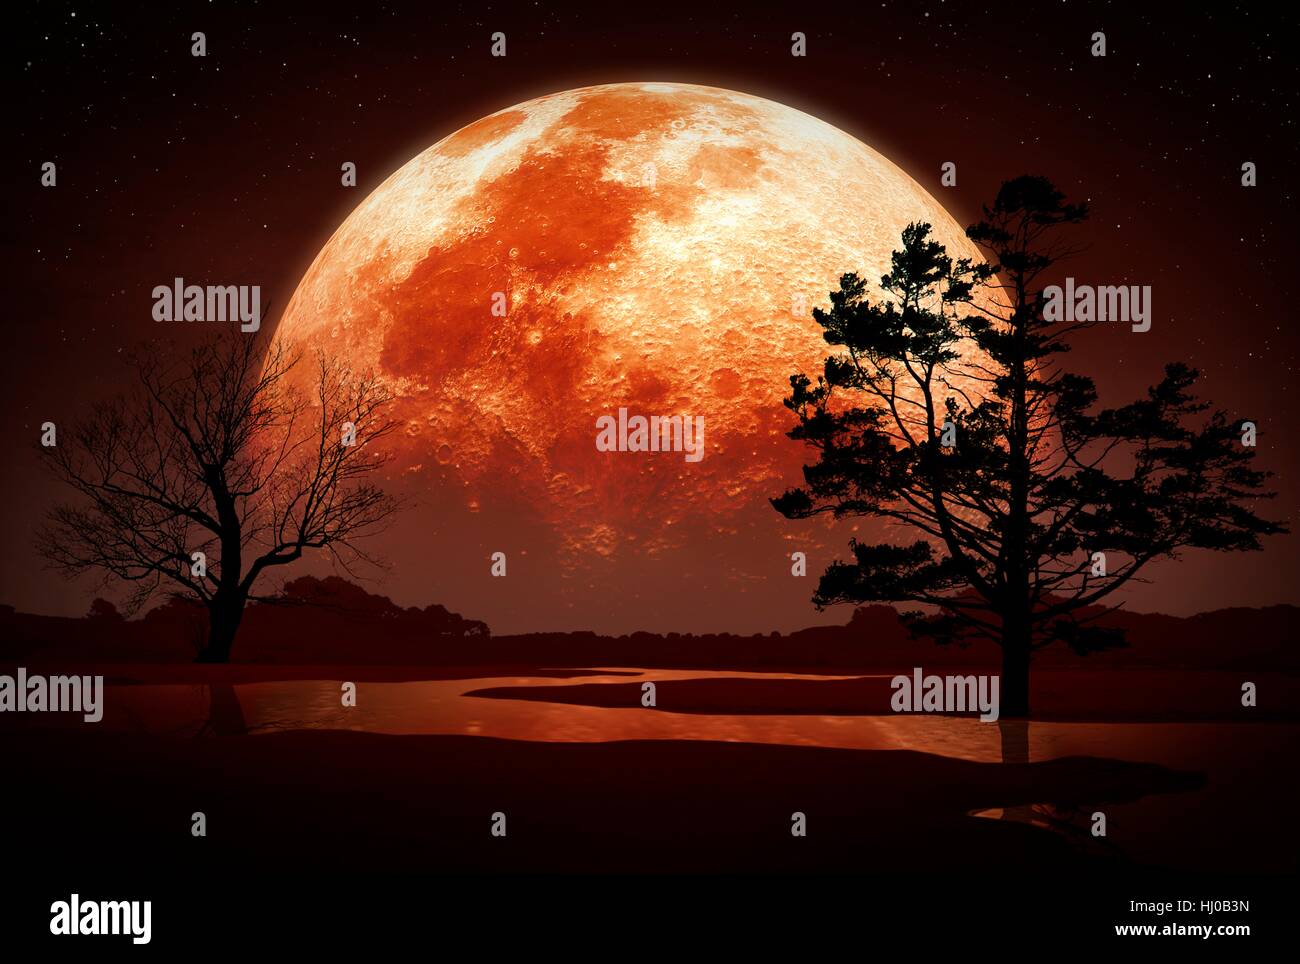 Artwork of a reddened Moon rising or setting, seen in the background of a tree-strewn landscape. Stock Photo